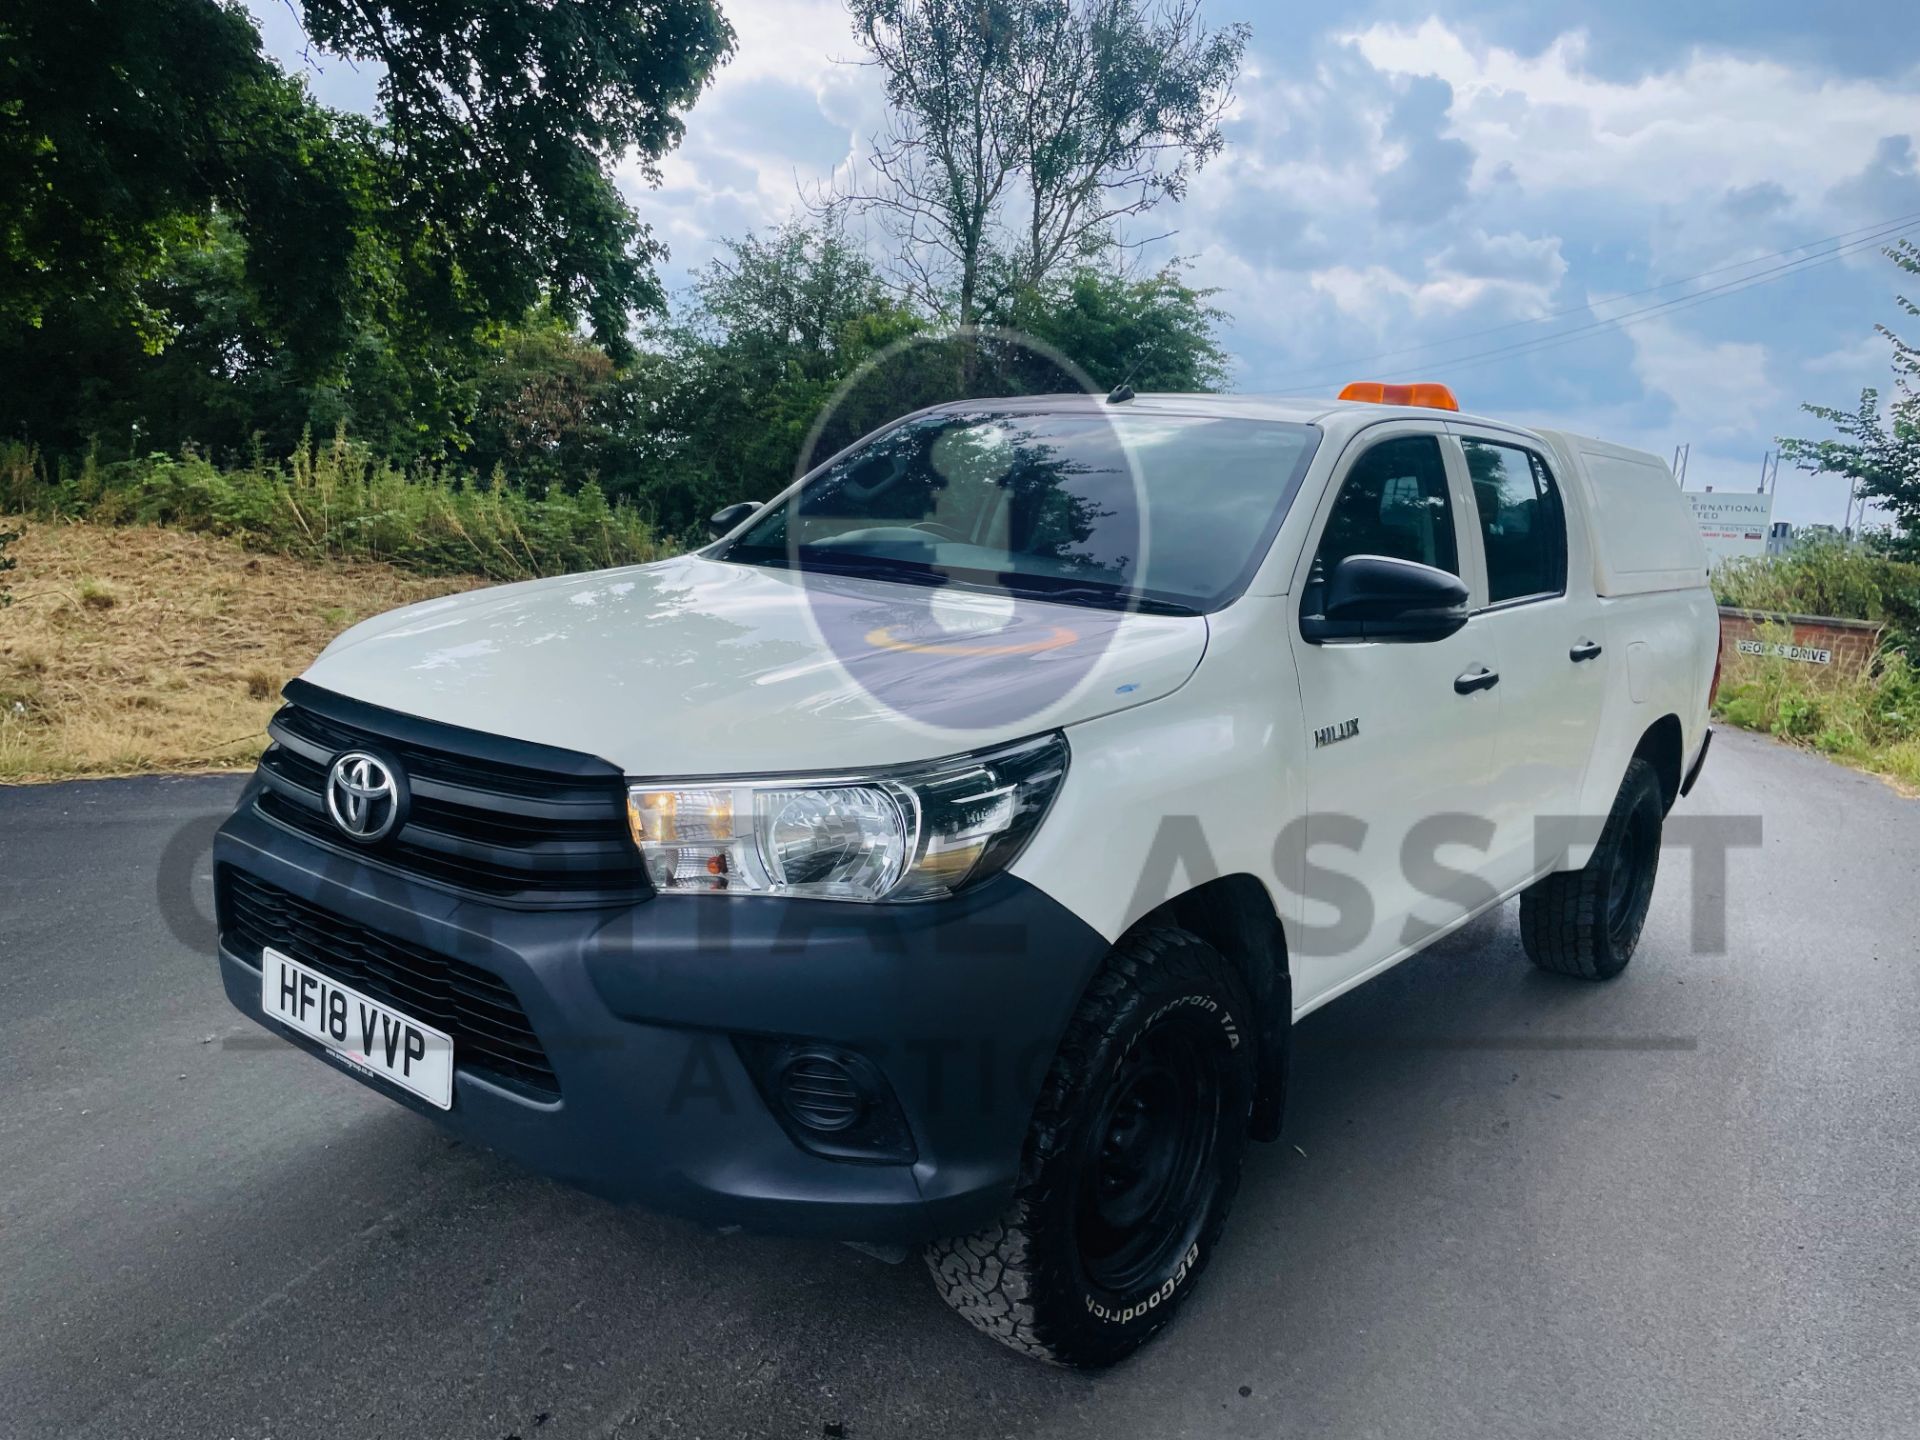 TOYOTA HILUX *DOUBLE CAB PICK-UP* (2018 - EURO 6) 2.4 D4-D - 6 SPEED (1 OWNER) *ULTRA LOW MILES* - Image 2 of 40